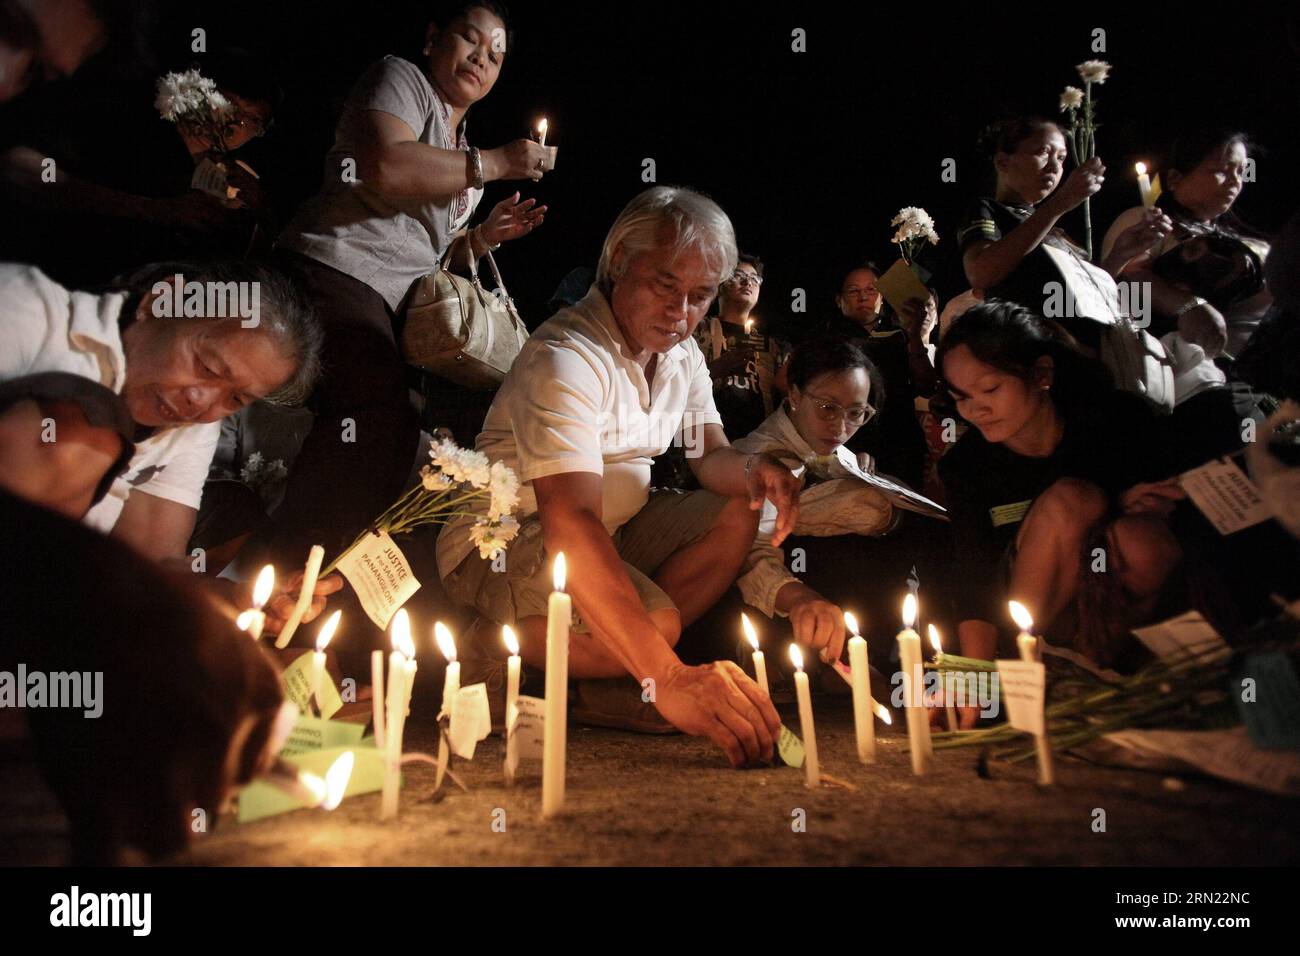 (150203) -- QUEZON CITY, Feb. 3, 2015 -- People light candles and offer flowers and prayers for the slain 49 members of the Philippine National Police Special Action Force (PNP-SAF) at the gate of the PNP Headquarters in Quezon City, the Philippines, Feb. 3, 2015. There was lack of coordination and planning between the military forces and the leadership of the PNP-SAF during the violent clash in Mamasapano, Maguindanao on Jan. 25, chief of the Armed Forces of the Philippines said on Tuesday. ) Authorized by ytfs PHILIPPINES-QUEZON CITY-CANDLE LIGHTING RouellexUmali PUBLICATIONxNOTxINxCHN   Que Stock Photo